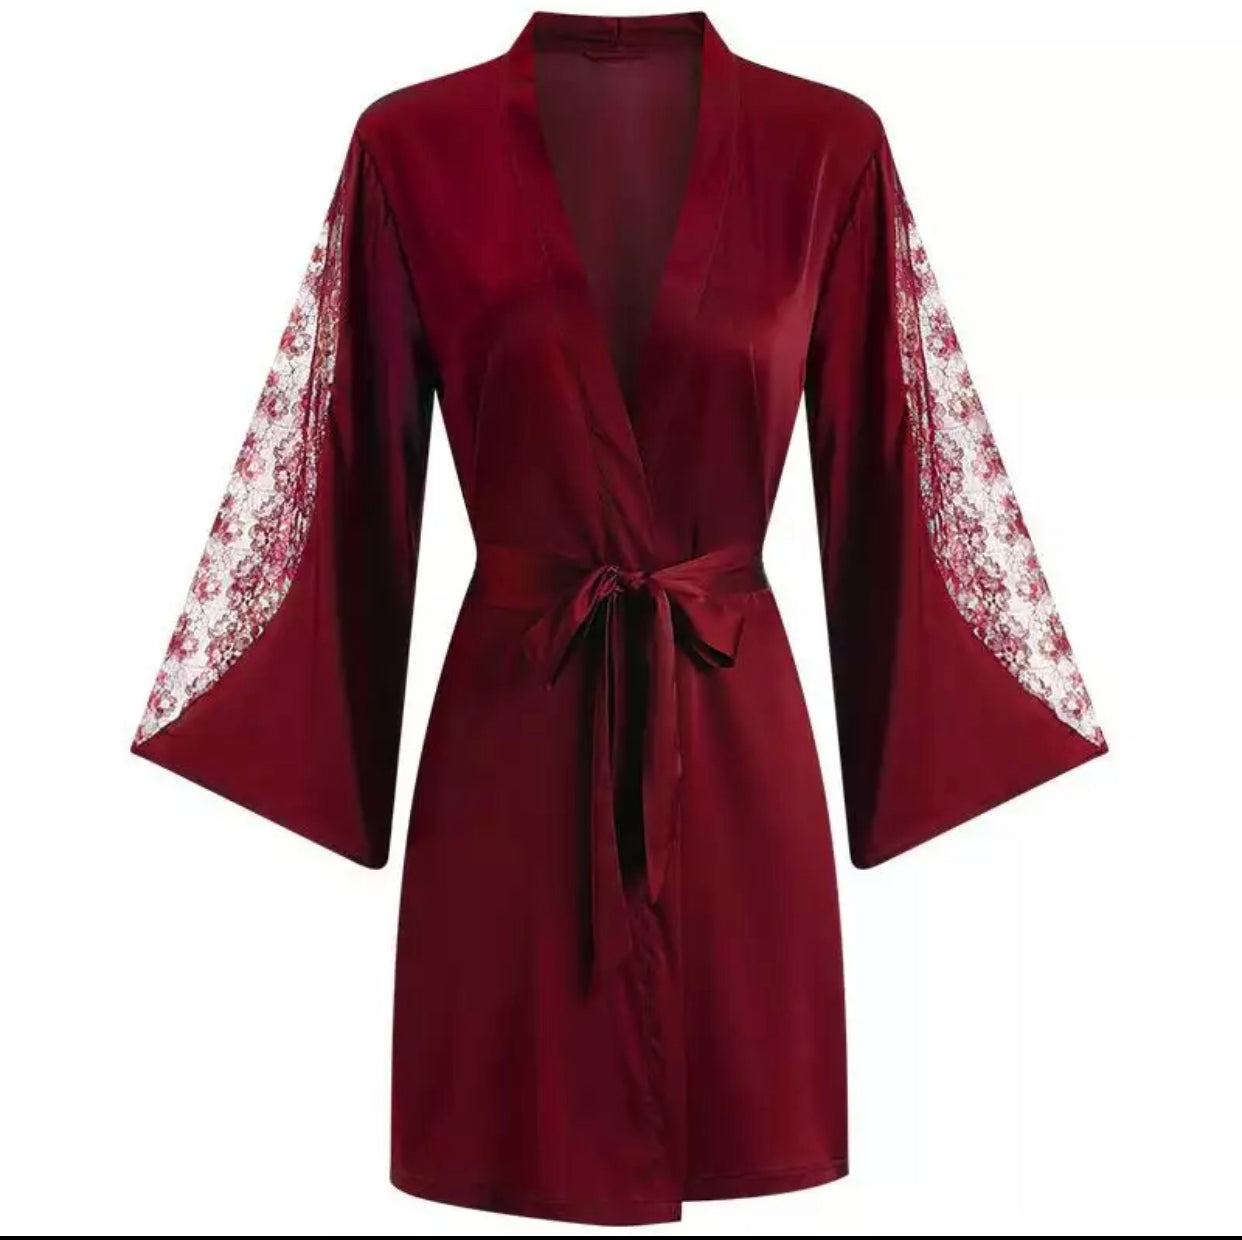 Floral Lace Cut-Out Sleeve Satin Robe